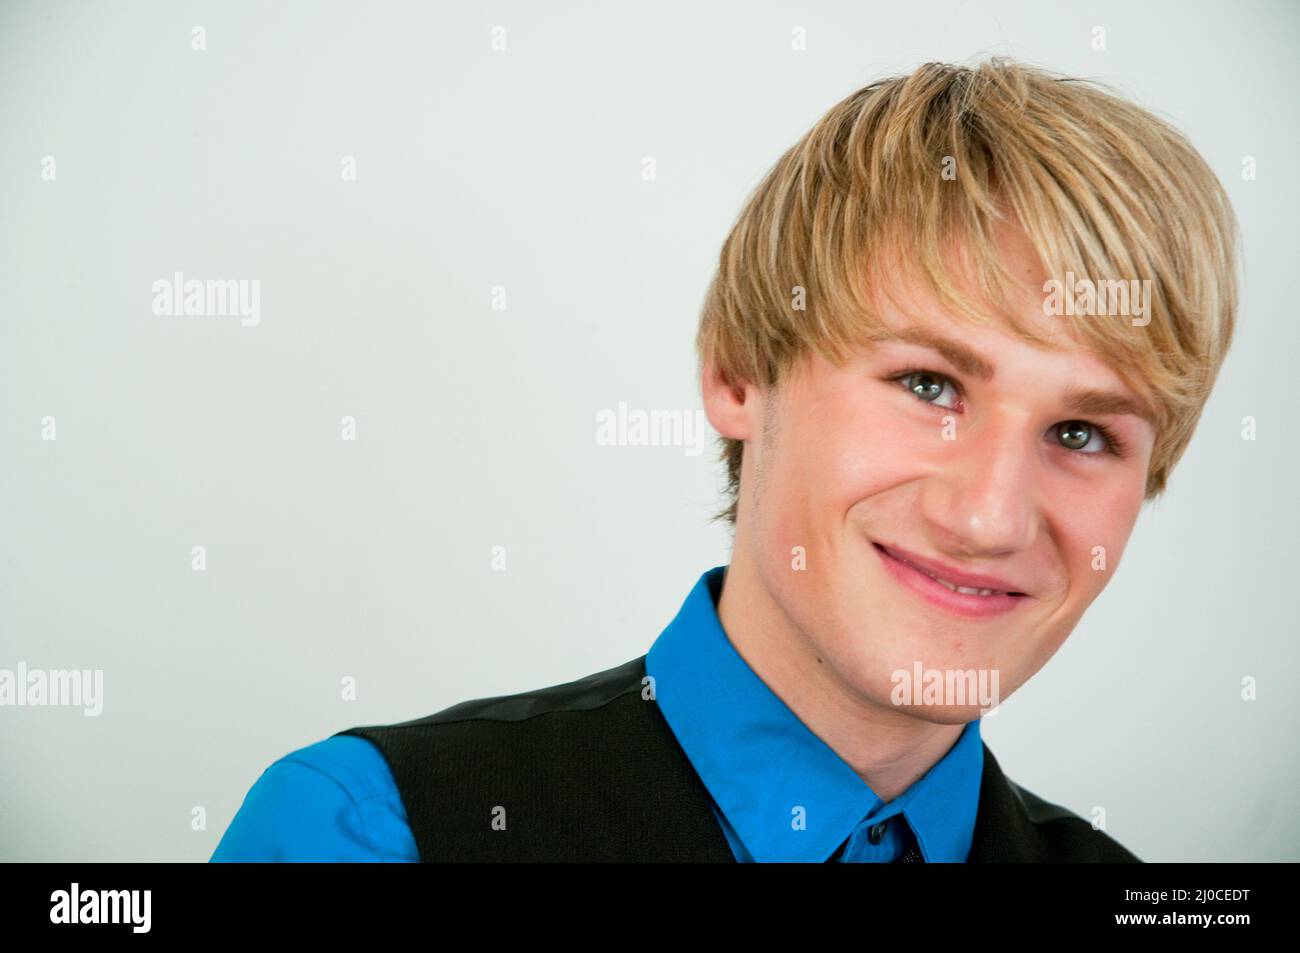 Young man smiling and looking up. Close view. Stock Photo